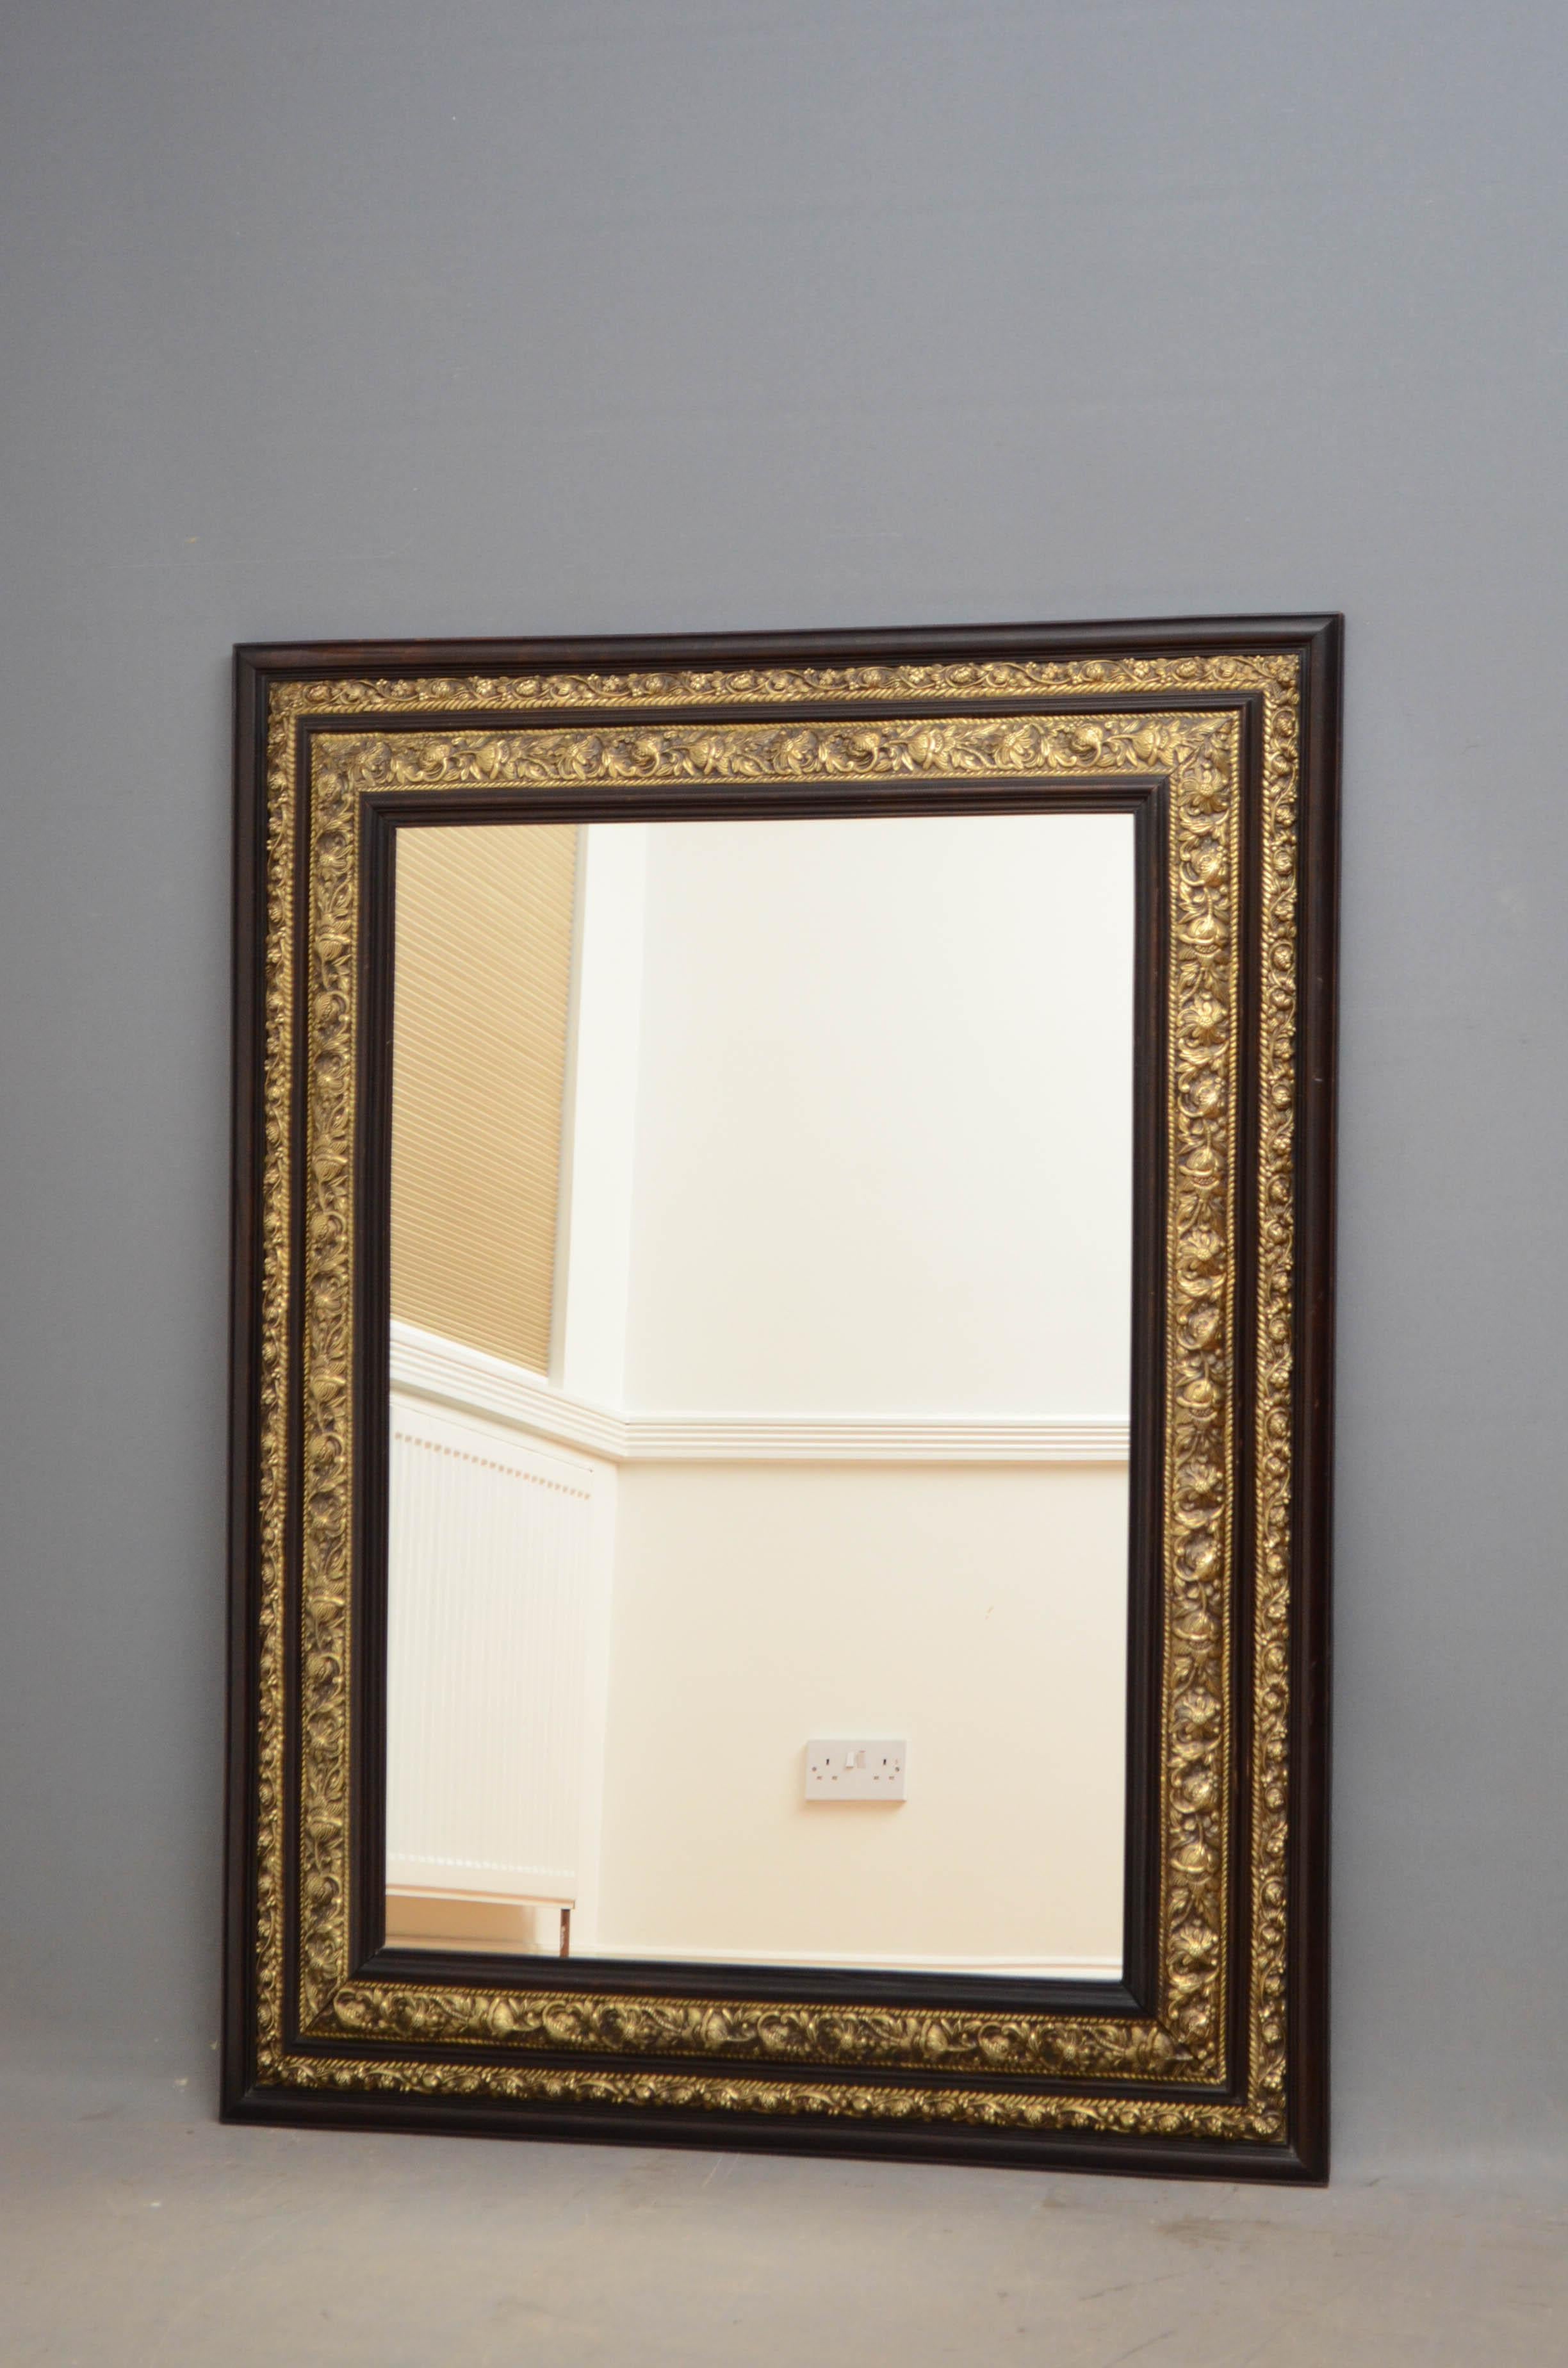 Sn4715 turn of the century French wall mirror, can be hung vertically or portrait with original glass in finely brass decorated and ebonized frame. This antique mirror is ready to place at home, circa 1900

Measures: H40? W53 1/4? D3.5?

H102cm